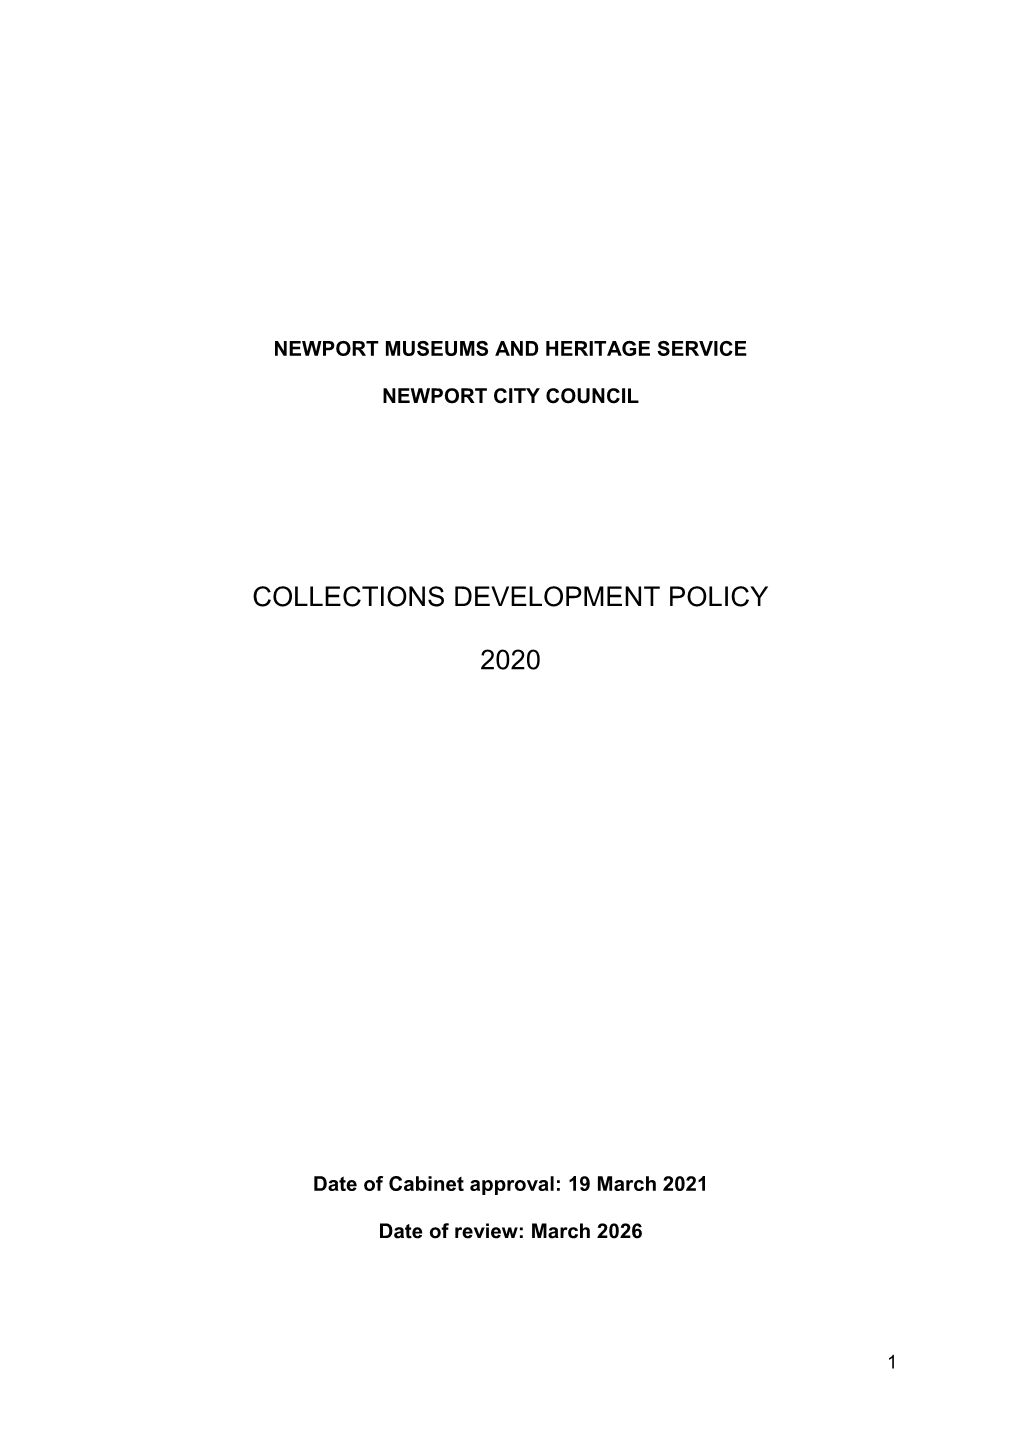 Collections Development Policy 2020